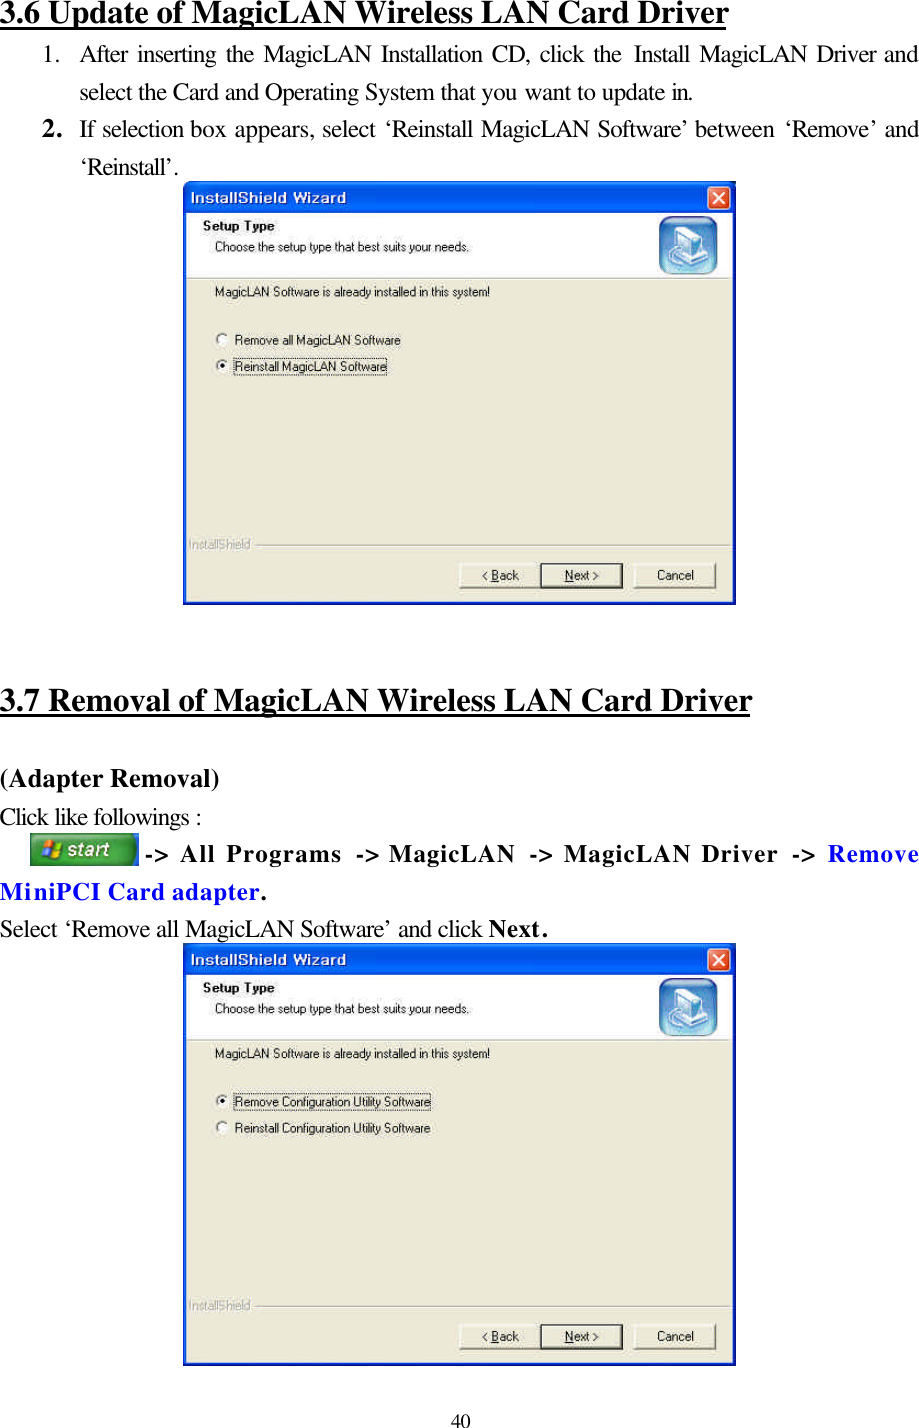  40  3.6 Update of MagicLAN Wireless LAN Card Driver 1.  After inserting the MagicLAN Installation CD, click the Install MagicLAN Driver and select the Card and Operating System that you want to update in. 2. If selection box appears, select ‘Reinstall MagicLAN Software’ between ‘Remove’ and ‘Reinstall’.     3.7 Removal of MagicLAN Wireless LAN Card Driver  (Adapter Removal) Click like followings :   -&gt; All Programs -&gt; MagicLAN  -&gt; MagicLAN Driver -&gt; Remove MiniPCI Card adapter. Select ‘Remove all MagicLAN Software’ and click Next.  